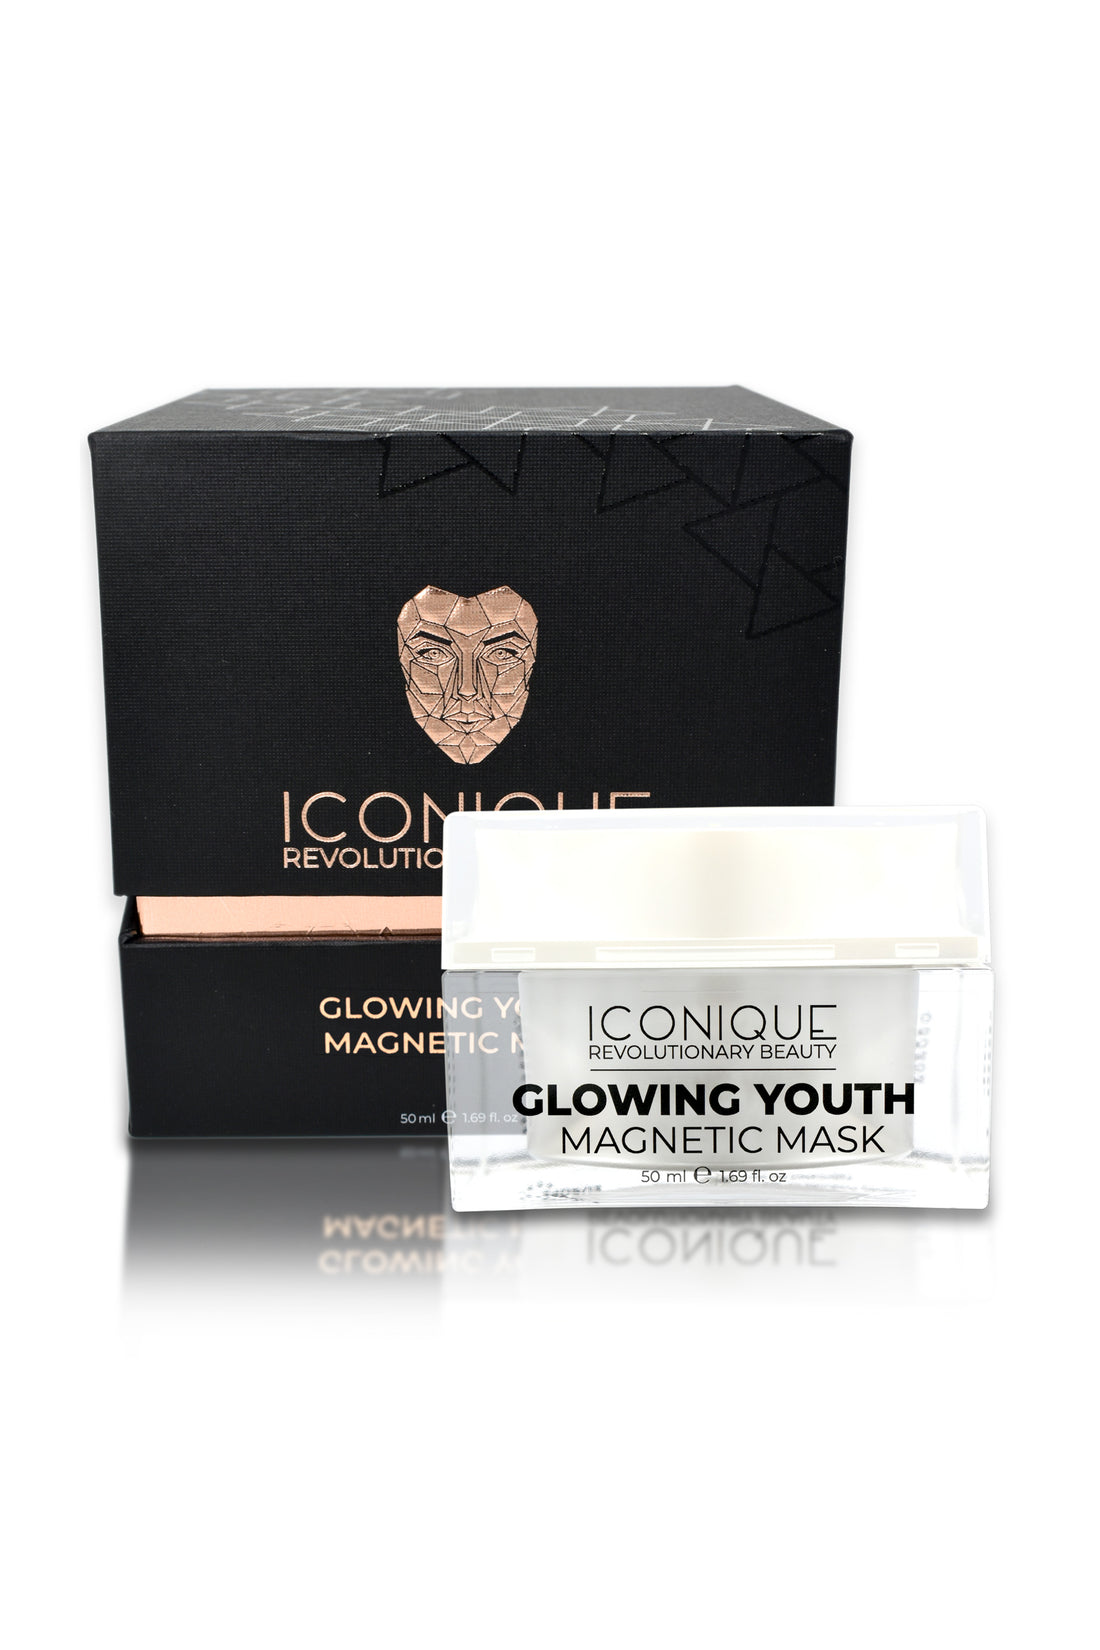 GLOWING YOUTH MAGNETIC MASK